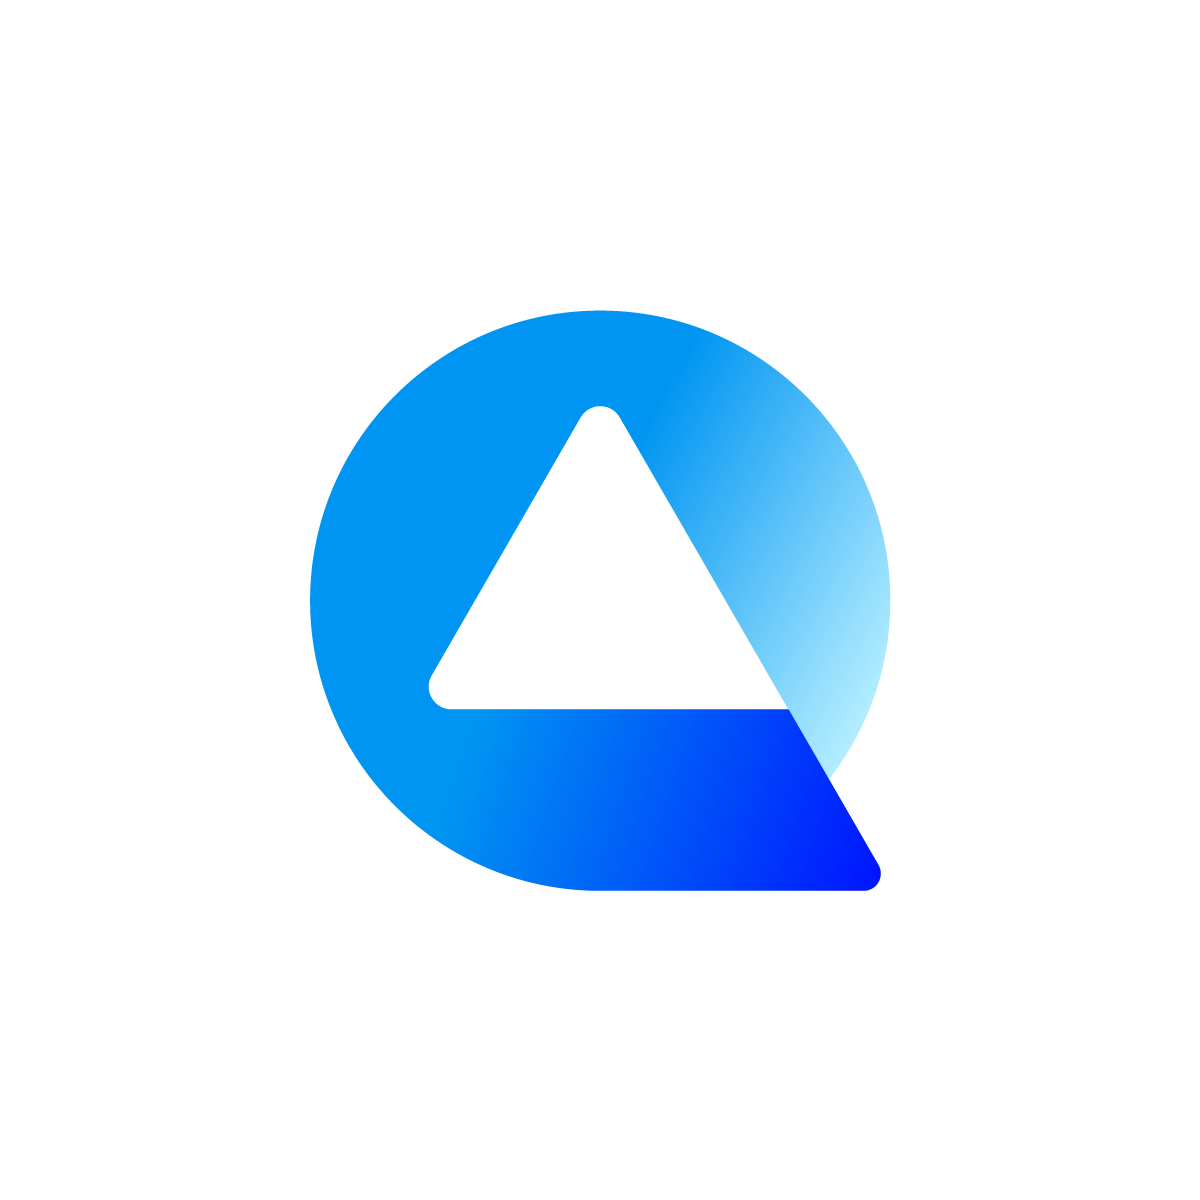 Logo featuring 'Q' with embedded triangle, signifying modern cryptocurrency innovation, stability, security, and digital financial freedom, suited for crypto startups and blockchain firms.